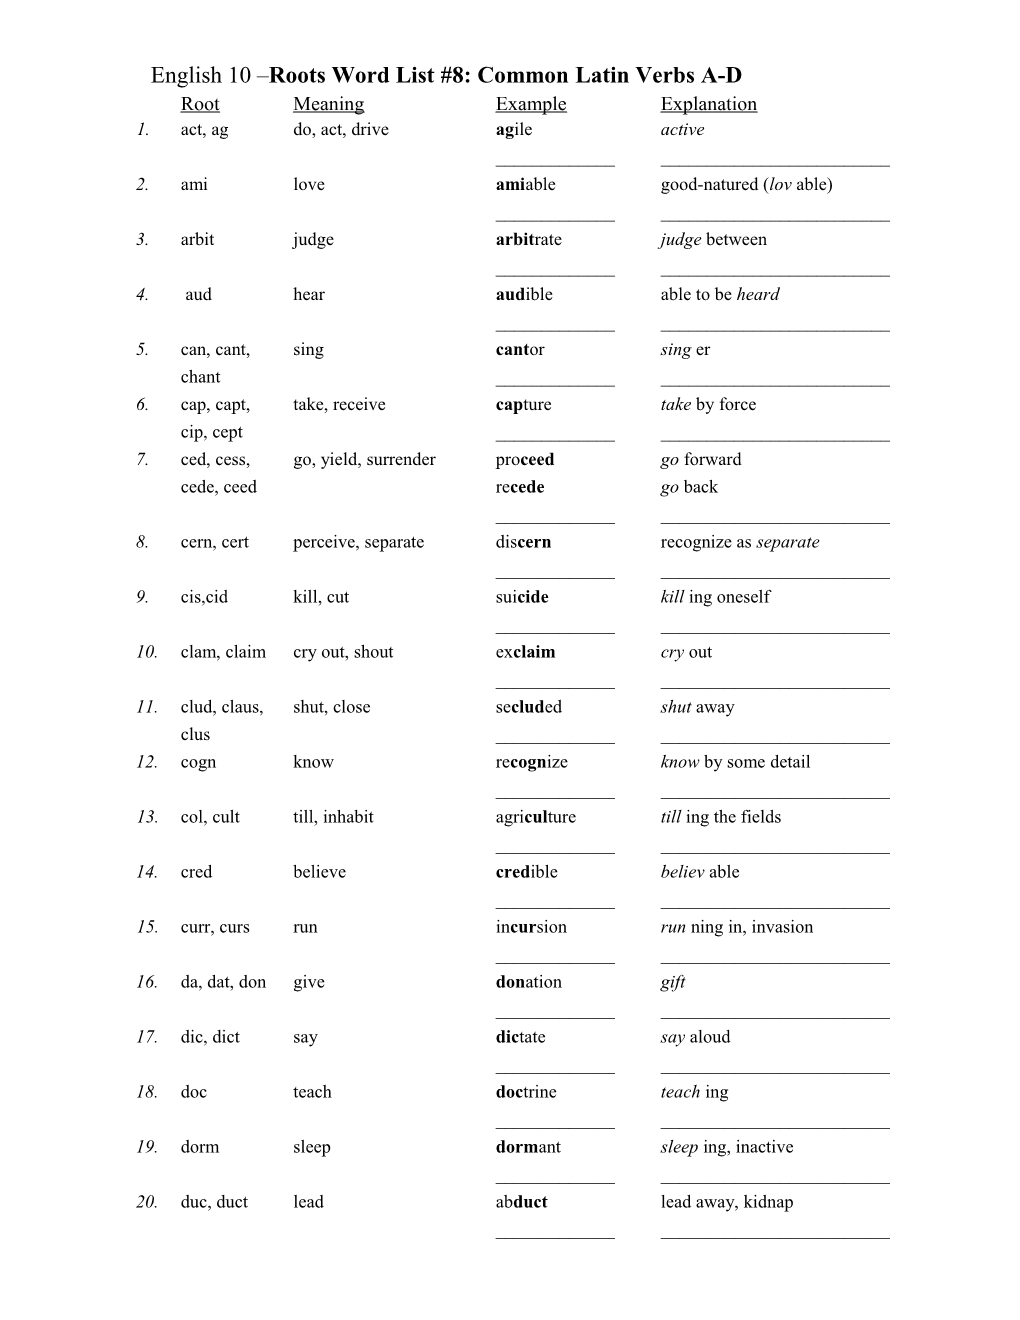 English 10 Roots Word List #8: Common Latin Verbs A-D